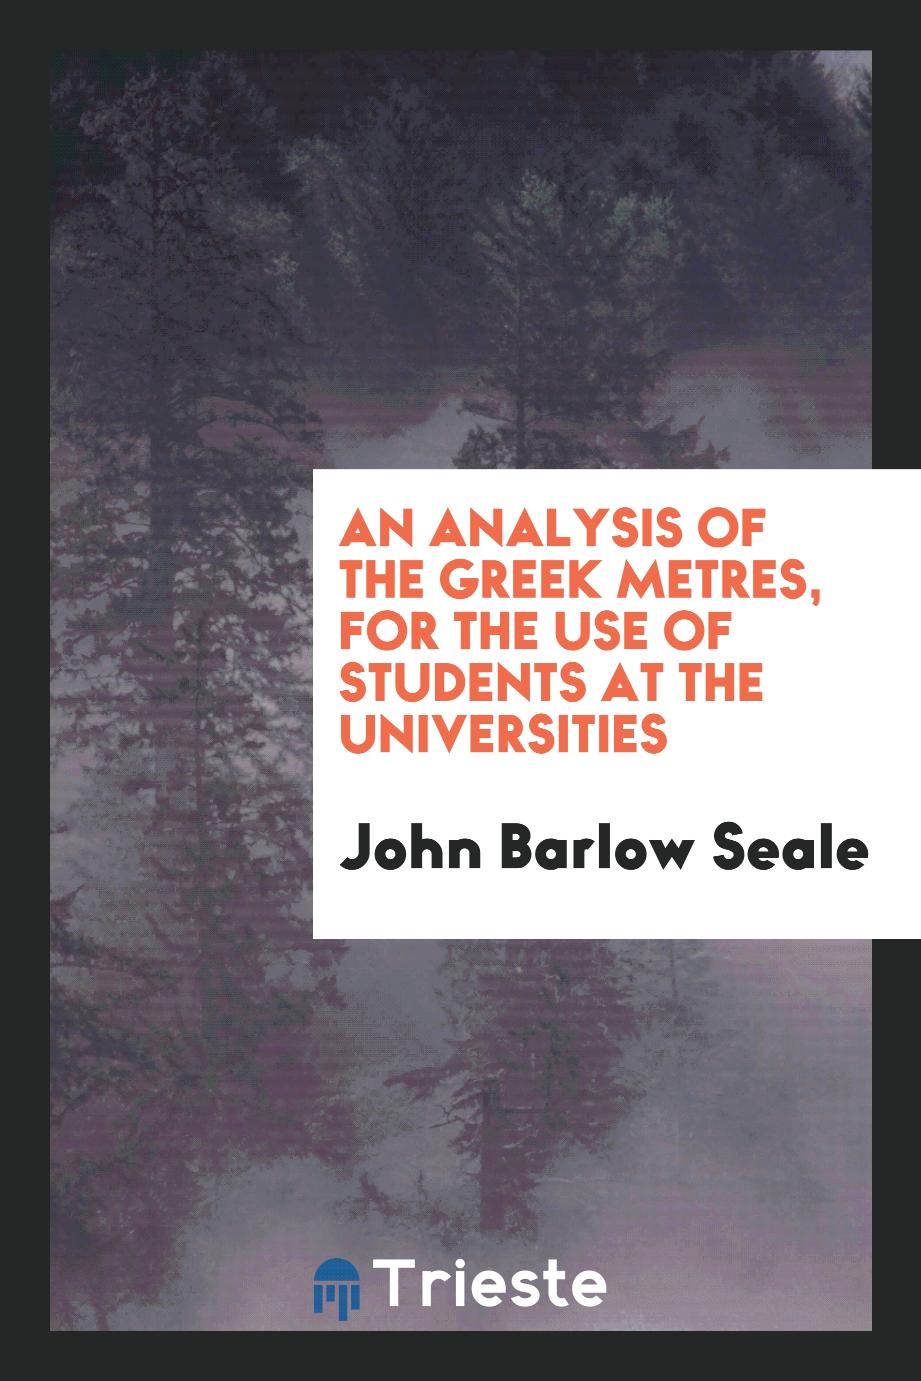 An Analysis of the Greek Metres, for the Use of Students at the Universities - John Barlow Seale